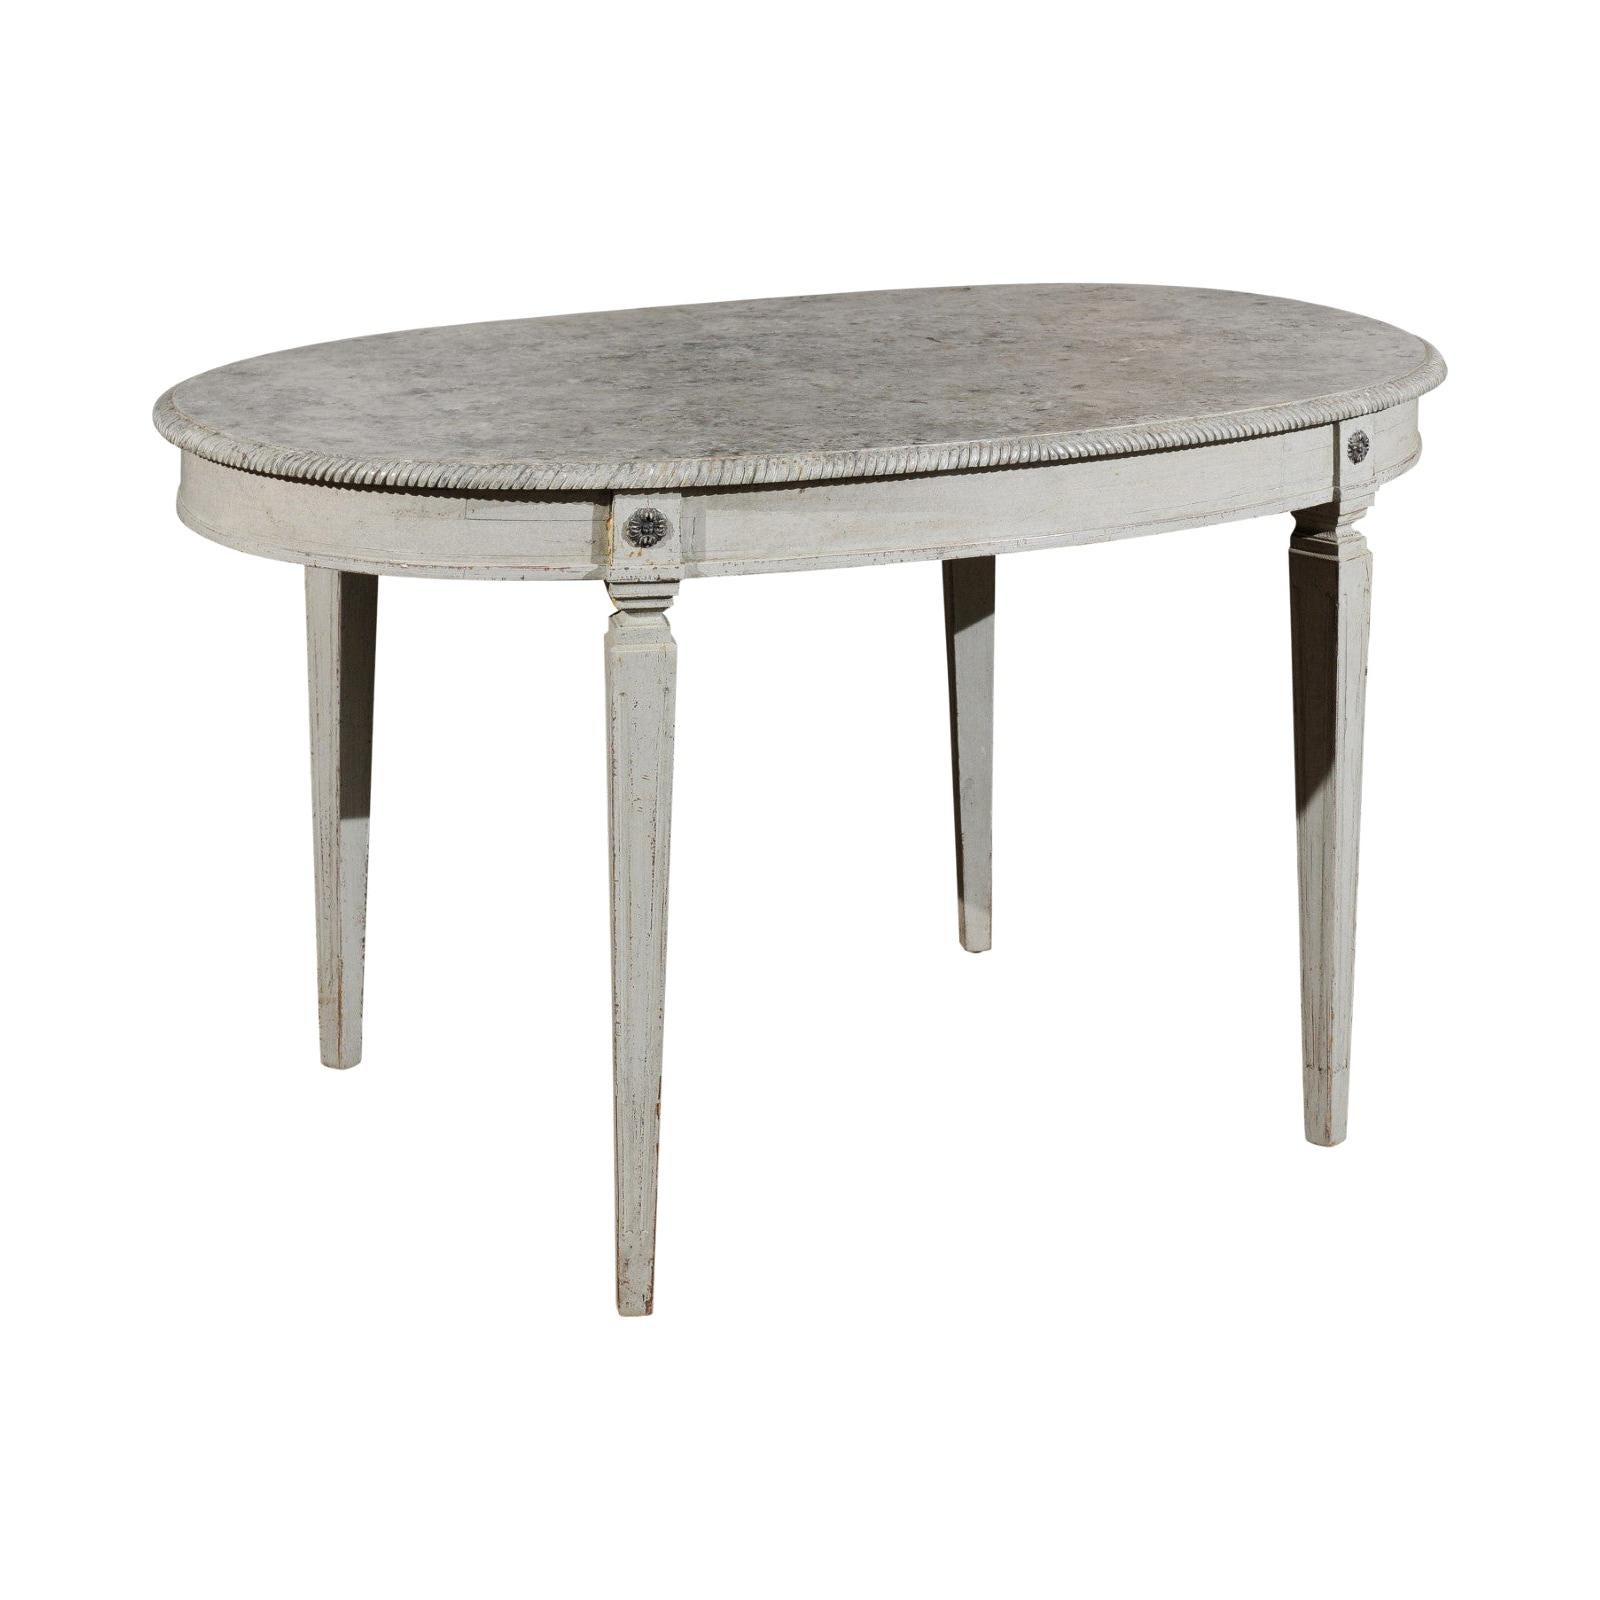 Swedish Gustavian Style Grey Painted Table with Marbleized Oval Top, circa 1880